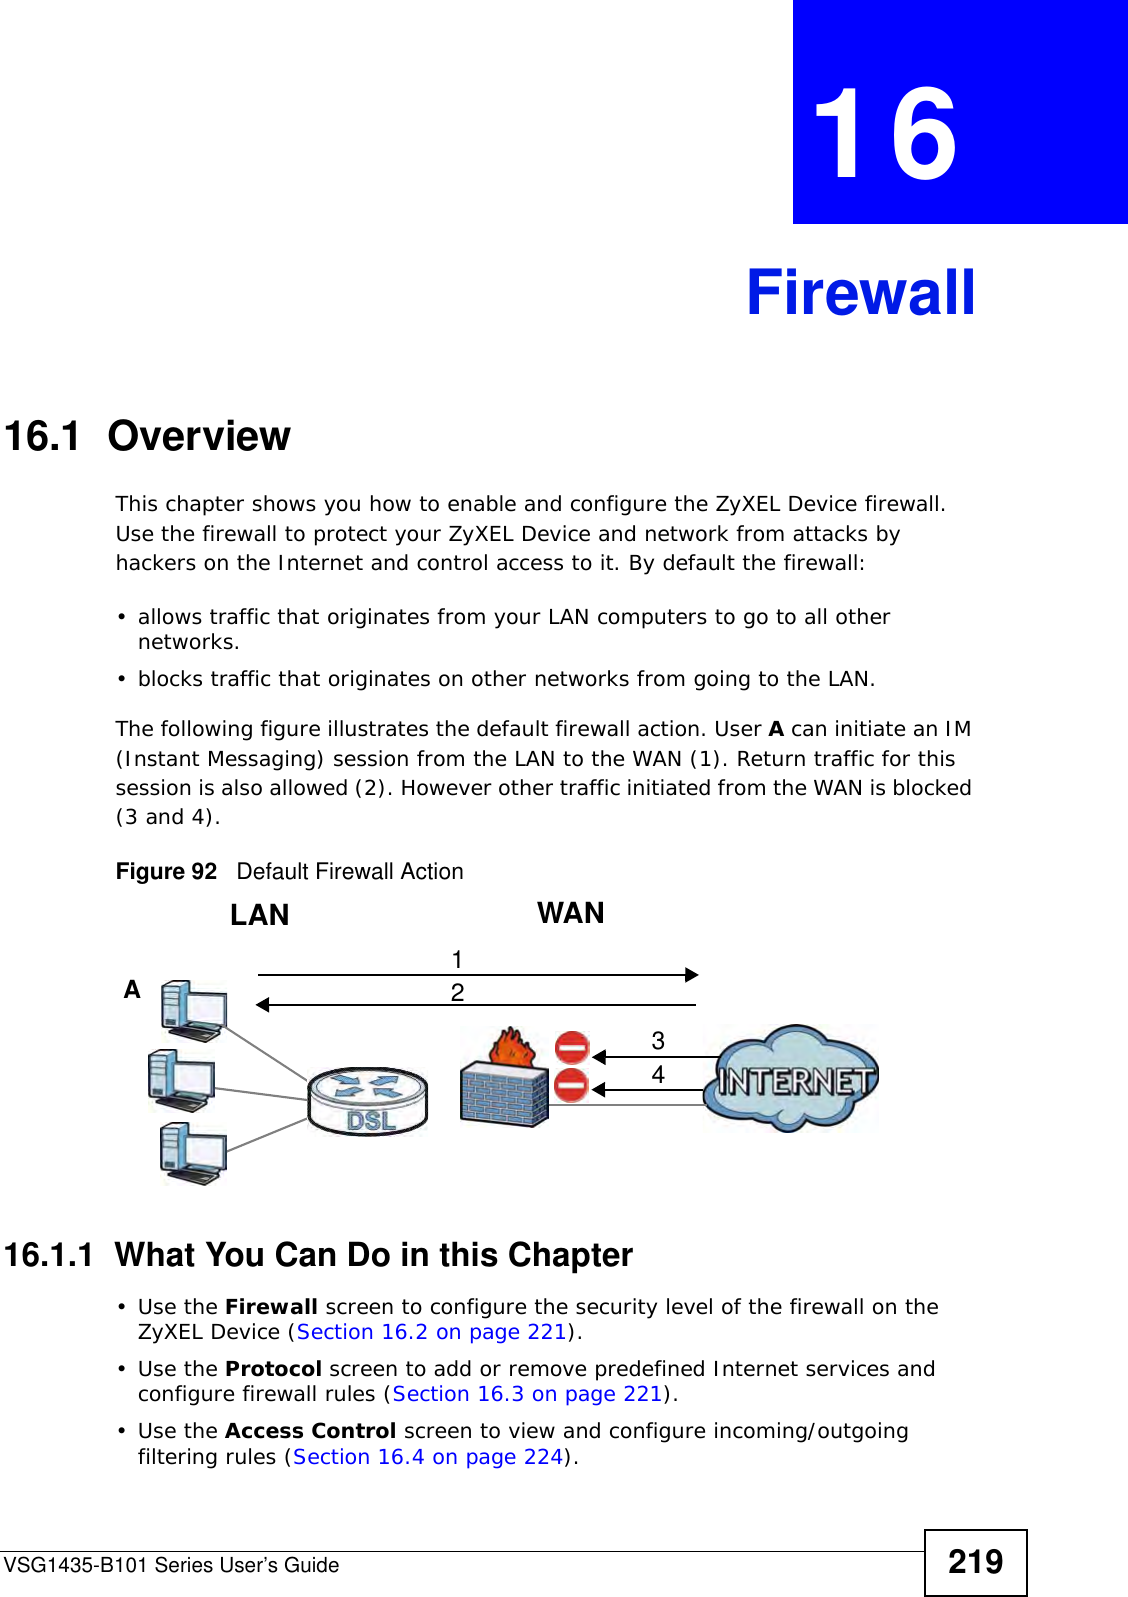 VSG1435-B101 Series User’s Guide 219CHAPTER  16 Firewall16.1  OverviewThis chapter shows you how to enable and configure the ZyXEL Device firewall. Use the firewall to protect your ZyXEL Device and network from attacks by hackers on the Internet and control access to it. By default the firewall:• allows traffic that originates from your LAN computers to go to all other networks. • blocks traffic that originates on other networks from going to the LAN. The following figure illustrates the default firewall action. User A can initiate an IM (Instant Messaging) session from the LAN to the WAN (1). Return traffic for this session is also allowed (2). However other traffic initiated from the WAN is blocked (3 and 4).Figure 92   Default Firewall Action16.1.1  What You Can Do in this Chapter•Use the Firewall screen to configure the security level of the firewall on the ZyXEL Device (Section 16.2 on page 221).•Use the Protocol screen to add or remove predefined Internet services and configure firewall rules (Section 16.3 on page 221).•Use the Access Control screen to view and configure incoming/outgoing filtering rules (Section 16.4 on page 224). WANLAN3412A